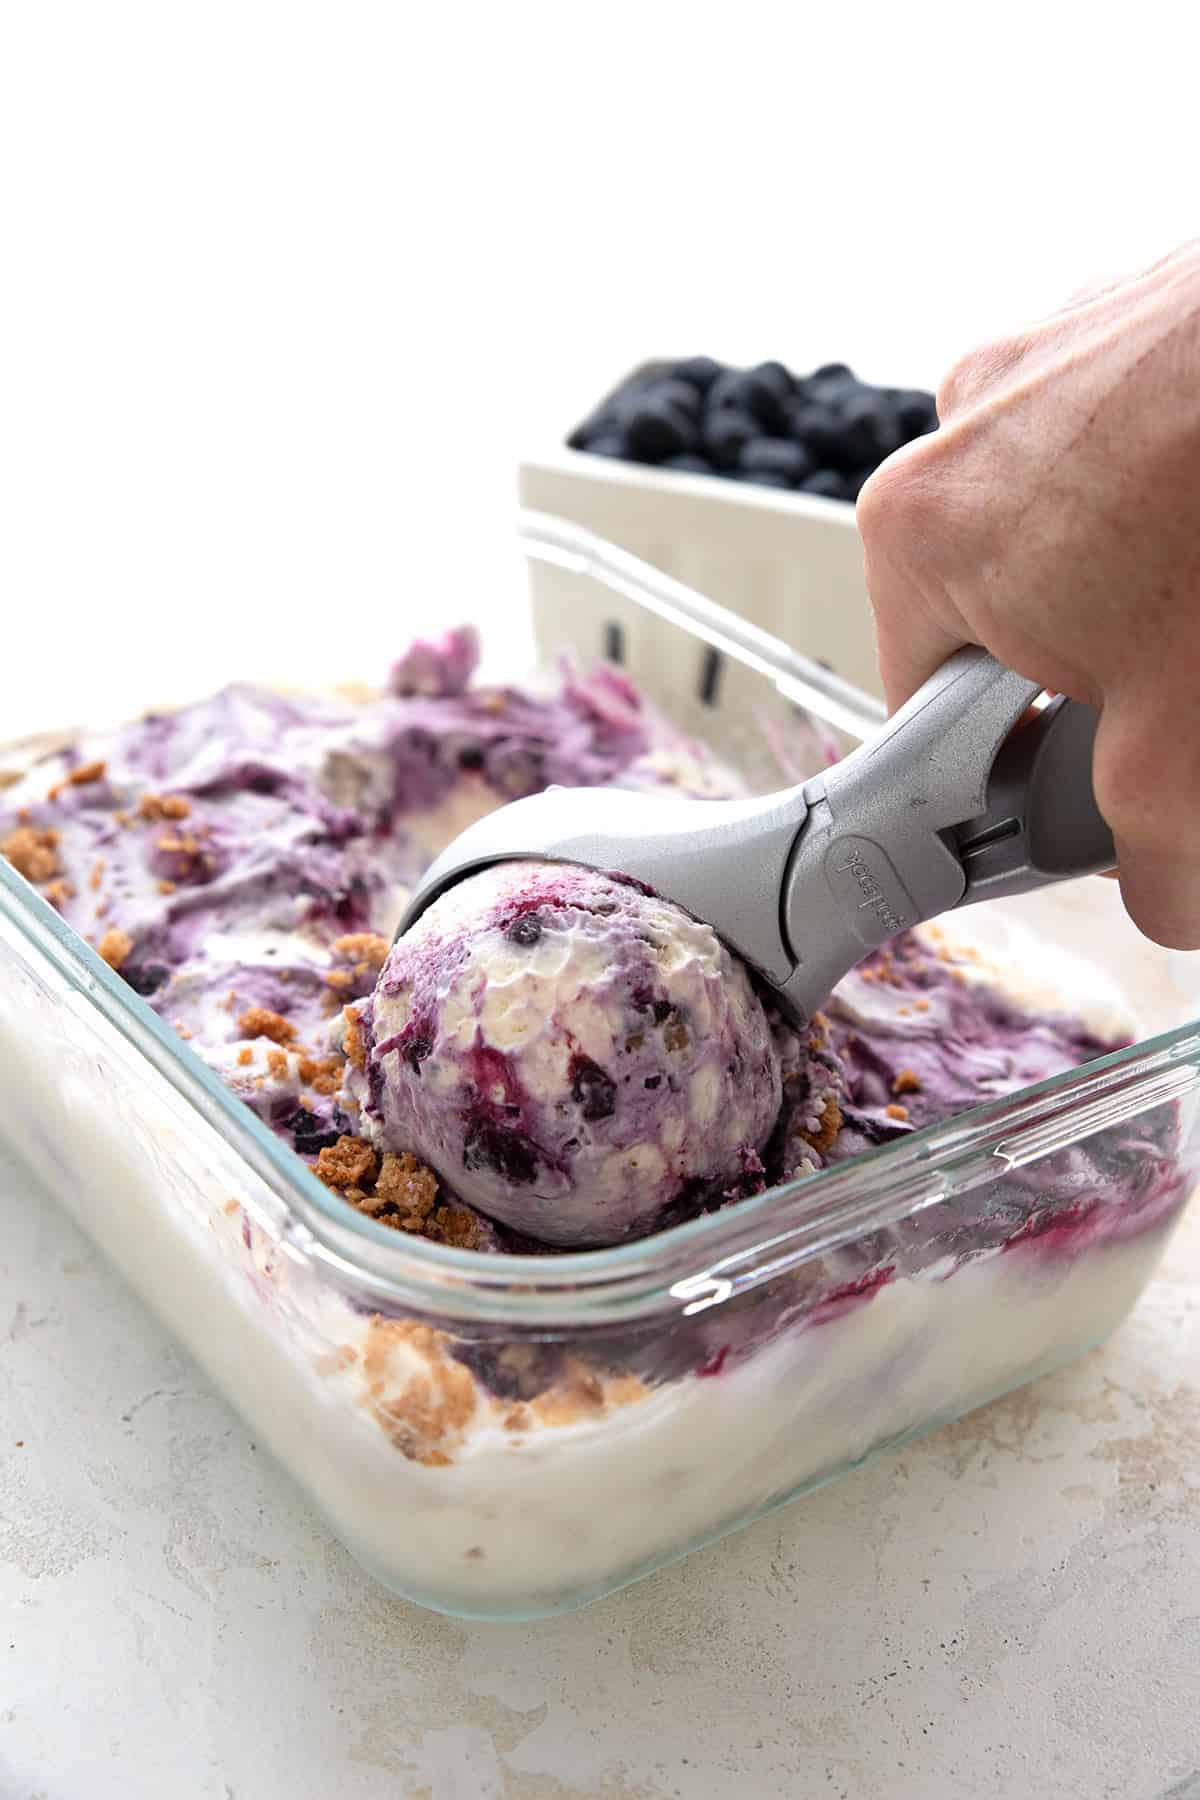 A ice cream scoop scooping blueberry pie ice cream out of the freezer container.